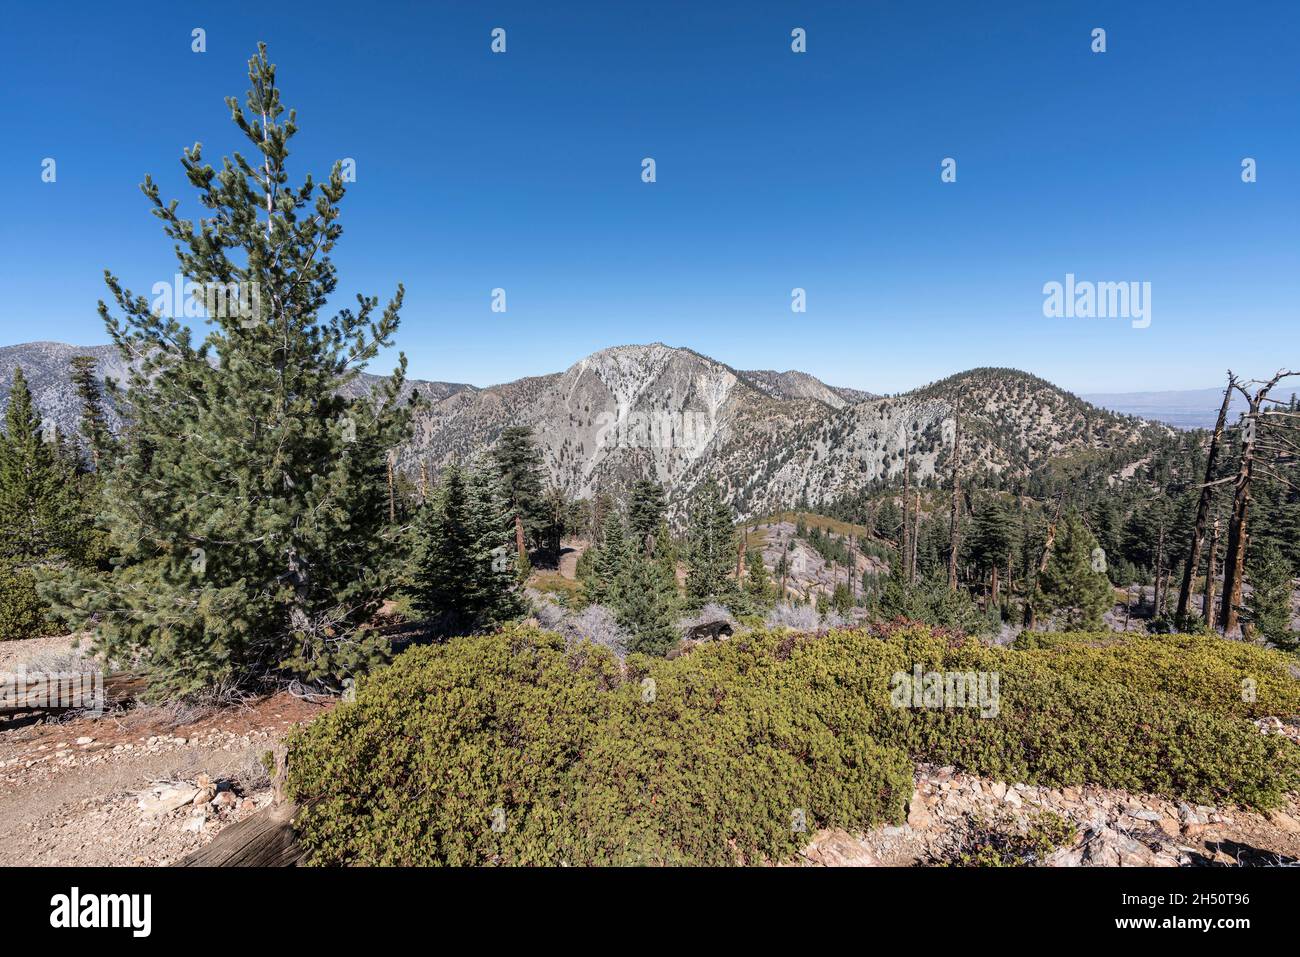 Telegraph Peak and Timber Mountain in the San Gabriel Mountains near Mt Baldy and Los Angeles, California. Stock Photo